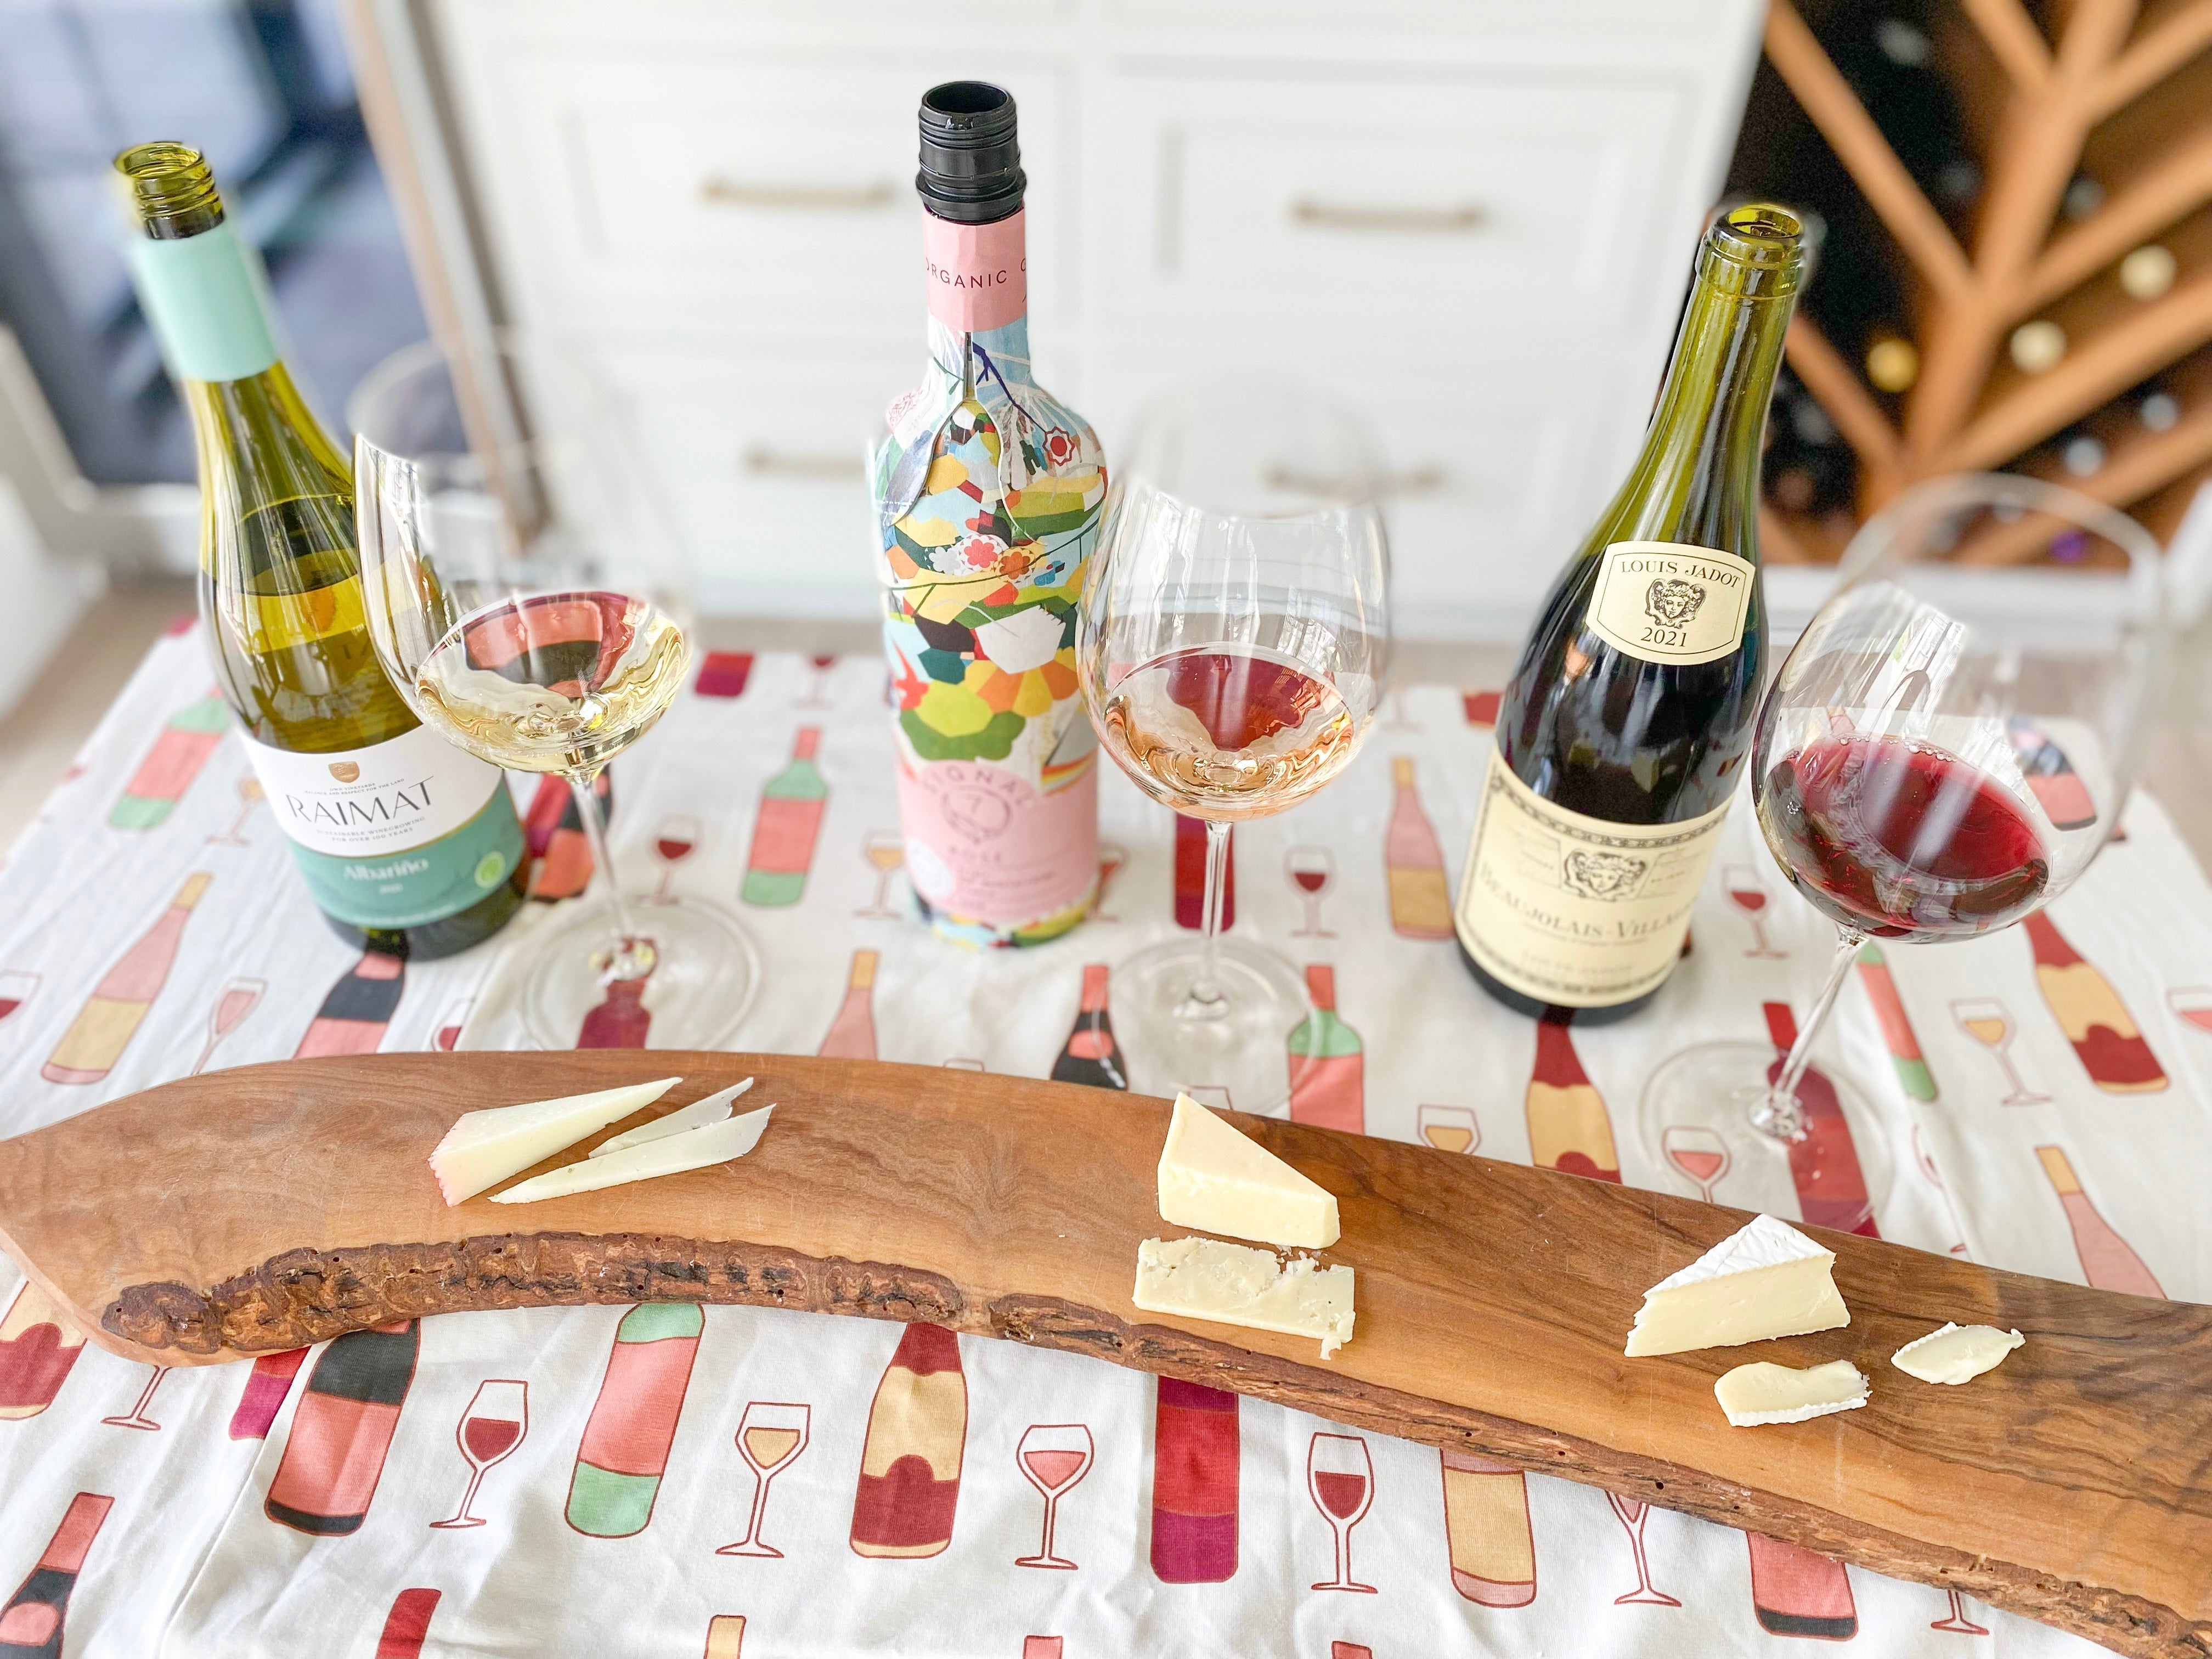 A Sommelier's Top 3 Wine + Cheese Pairings for Summer 🍷